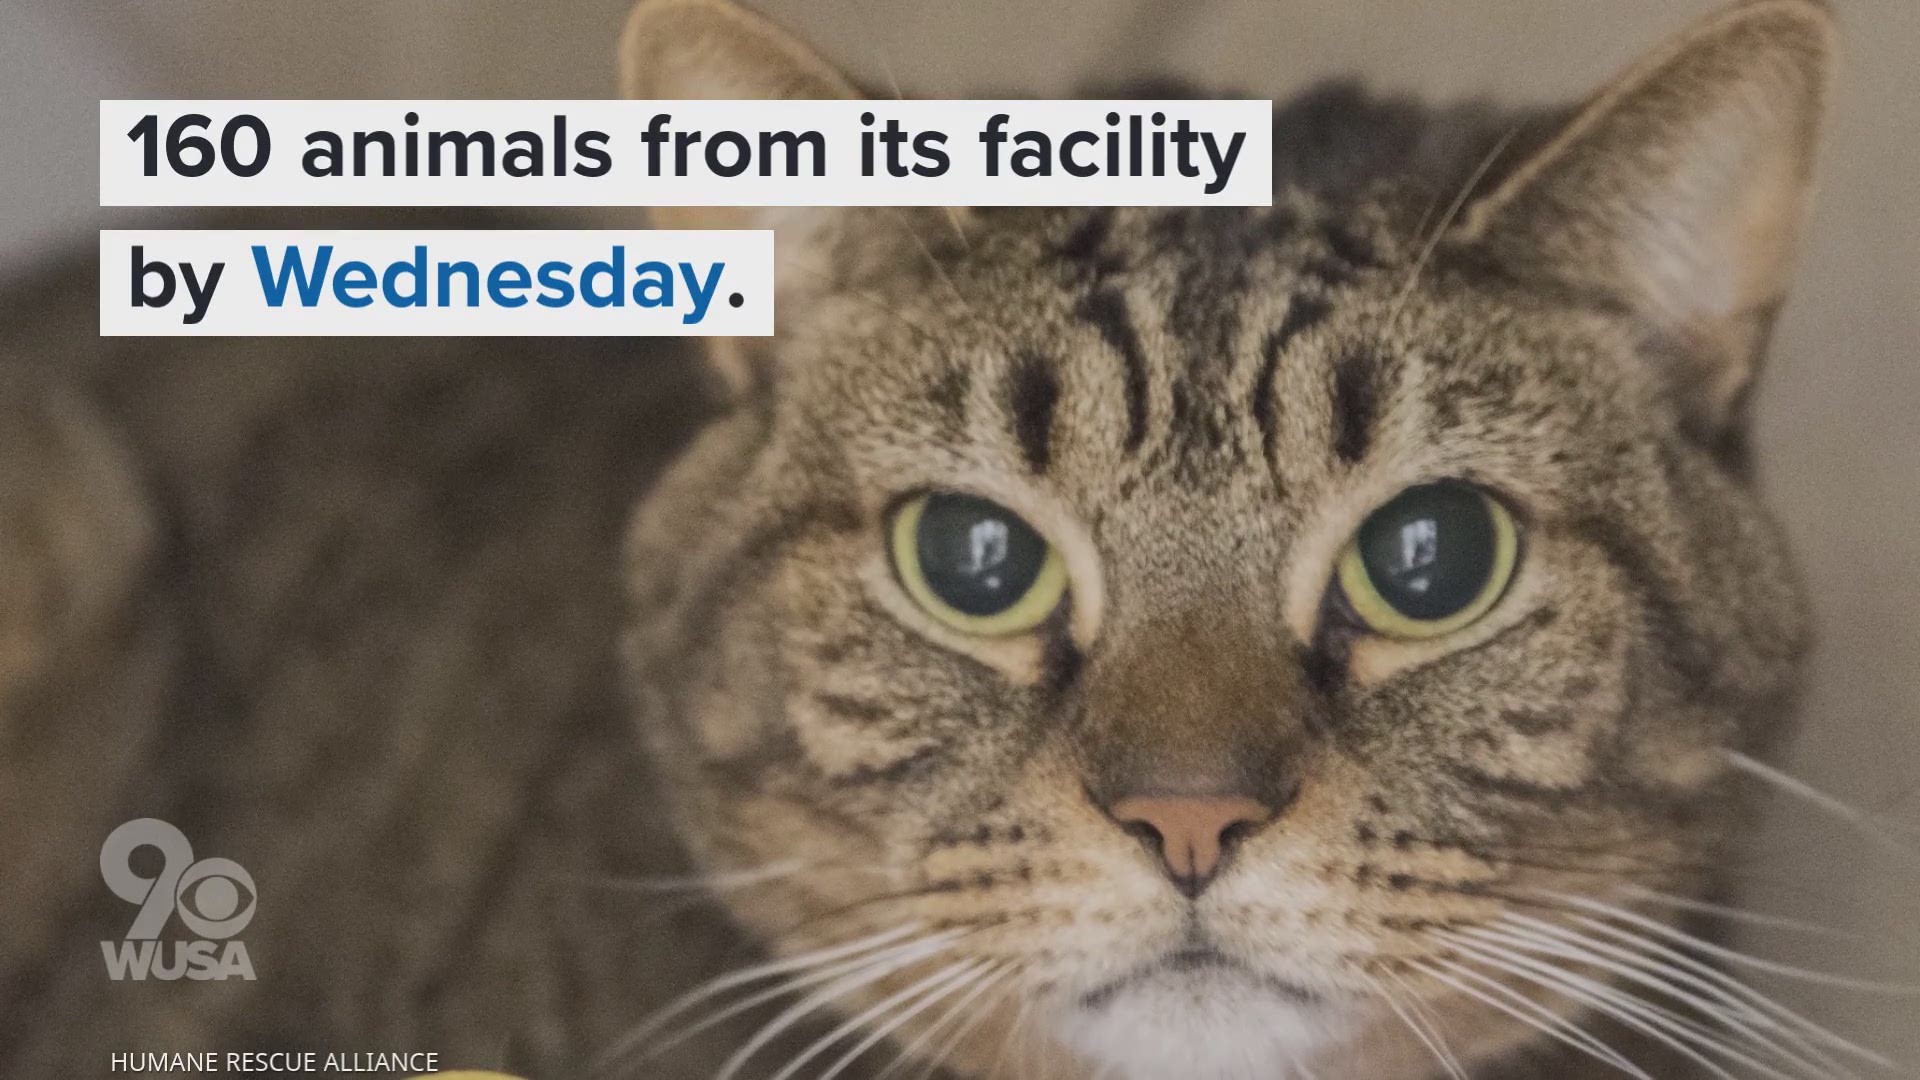 The HRA needs to evacuate 160 animals from its New York Ave. facility by Oct. 30.